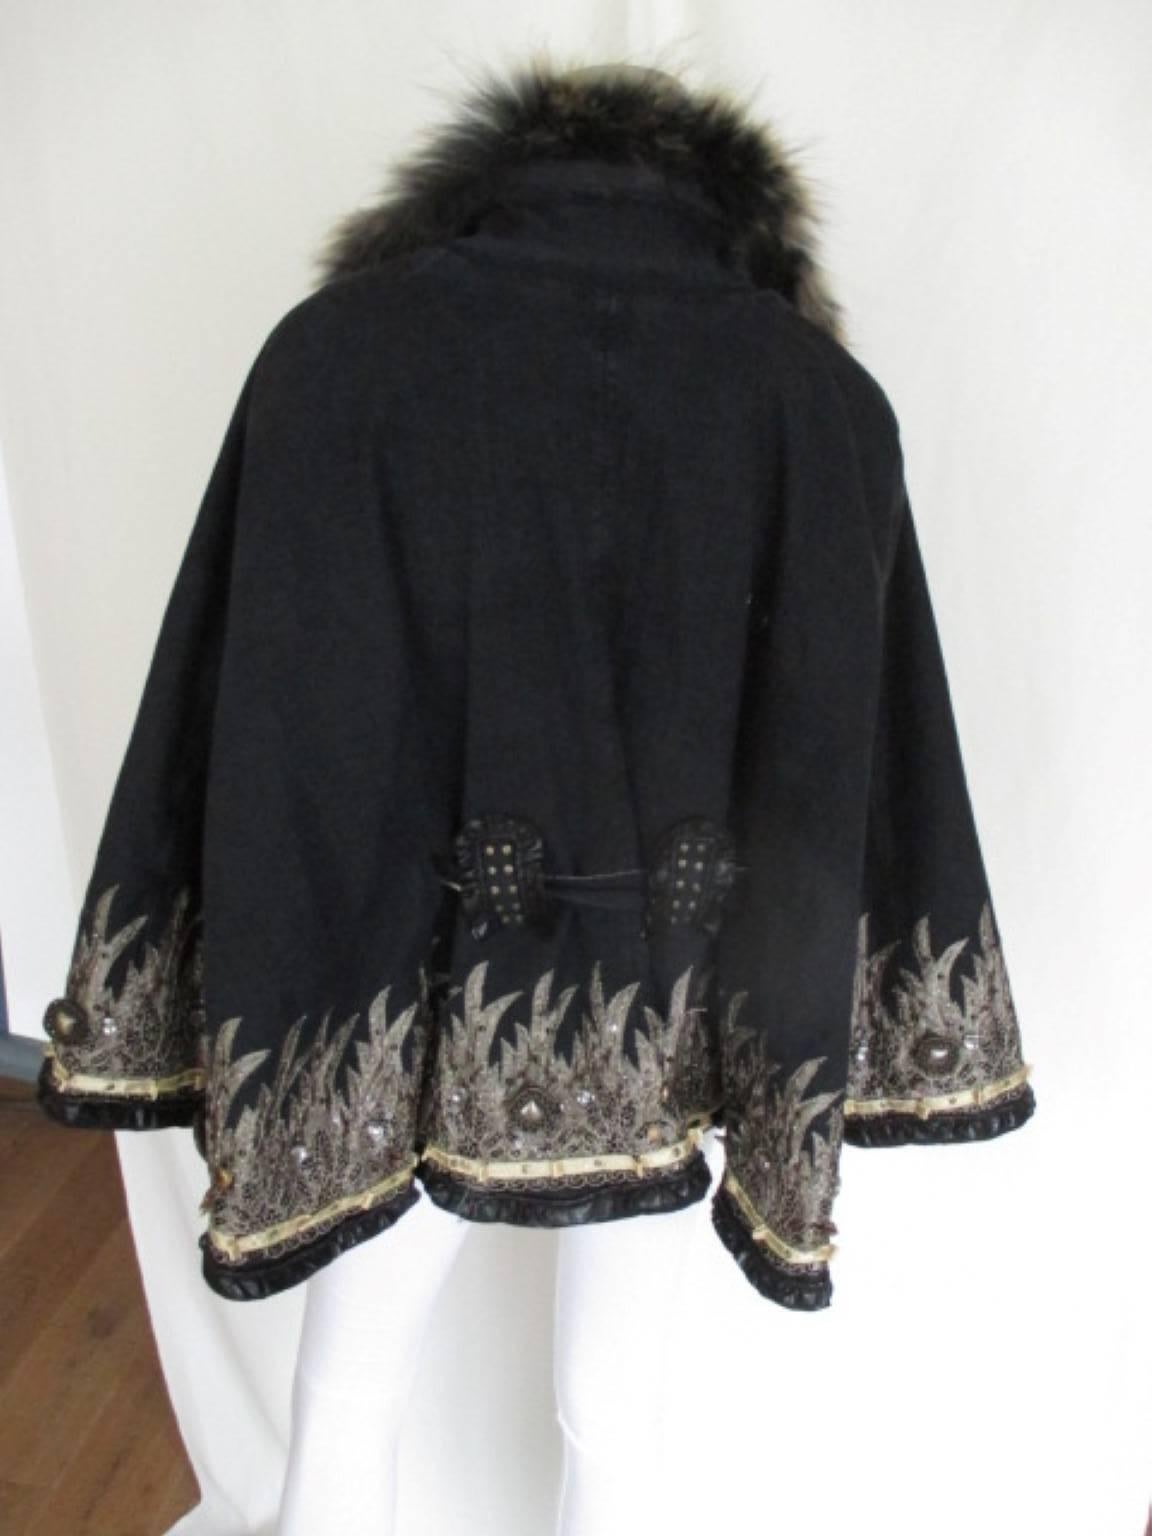 This cape is designed by Cobayashi.
Material outside is 98% cotton/ 2% elasthane,
Inside is soft material 60% polyester/ 40% acryl, which keep you warm.
Its embroidered with stones and gold color fabric.
The collar is made of fox fur.
Belt is on 1